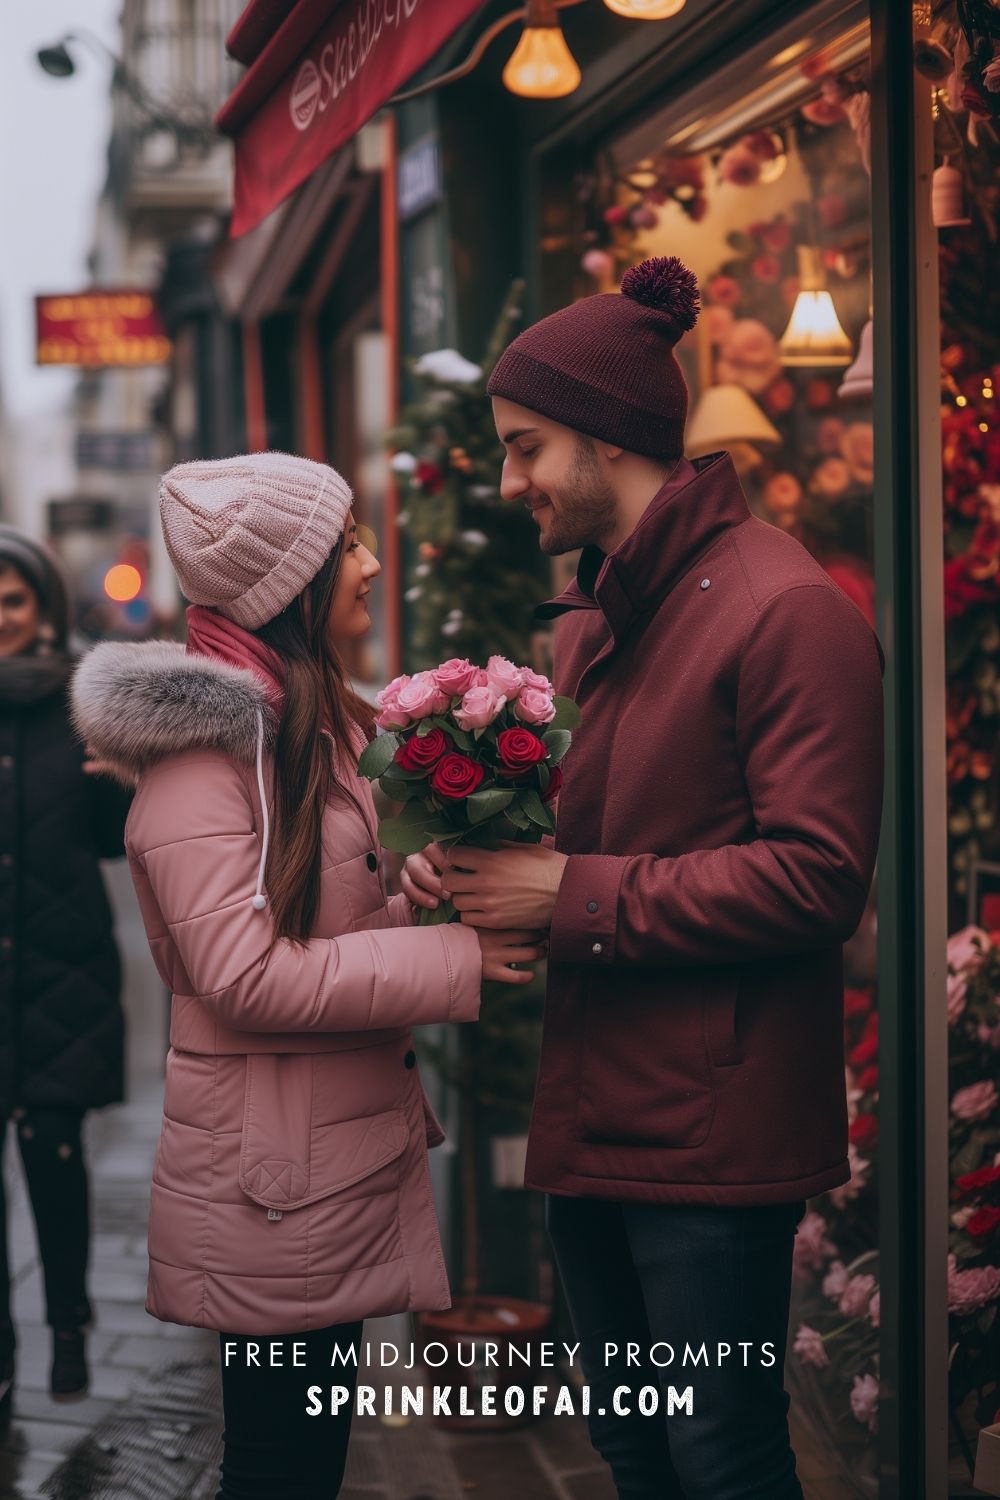 Best Midjourney Valentine's Day Prompts for Romantic Stock Photography - Sprinkle of AI - Free Midjourney Prompts for Valentine